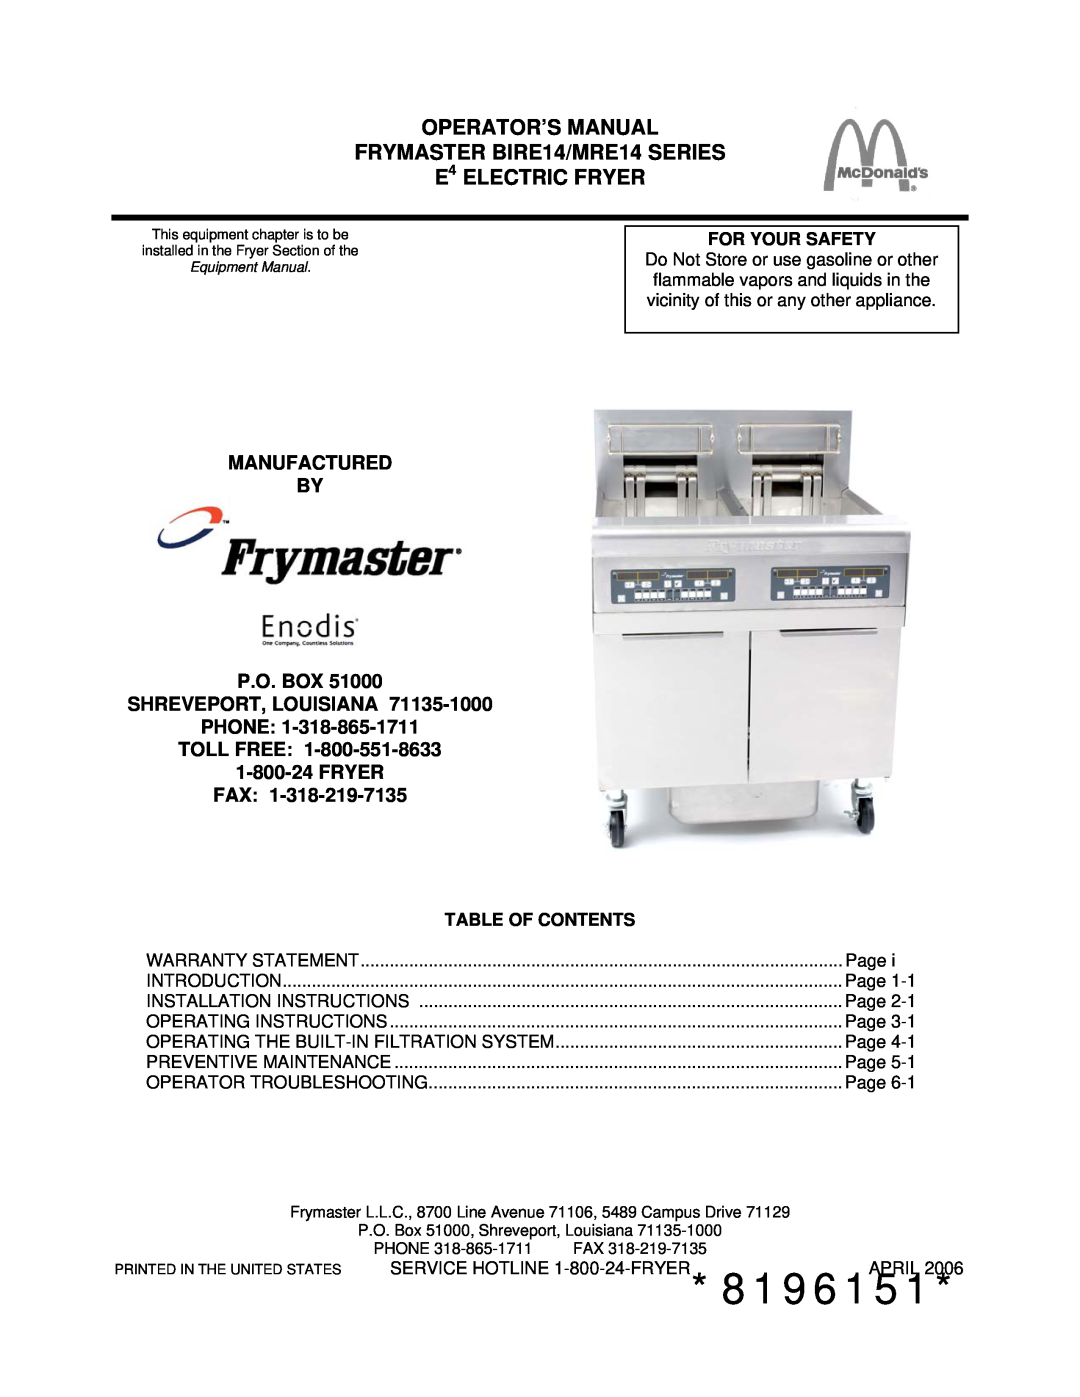 Frymaster BIRE14 warranty 8196151, Manufactured By P.O. Box Shreveport, Louisiana, For Your Safety, Table Of Contents 